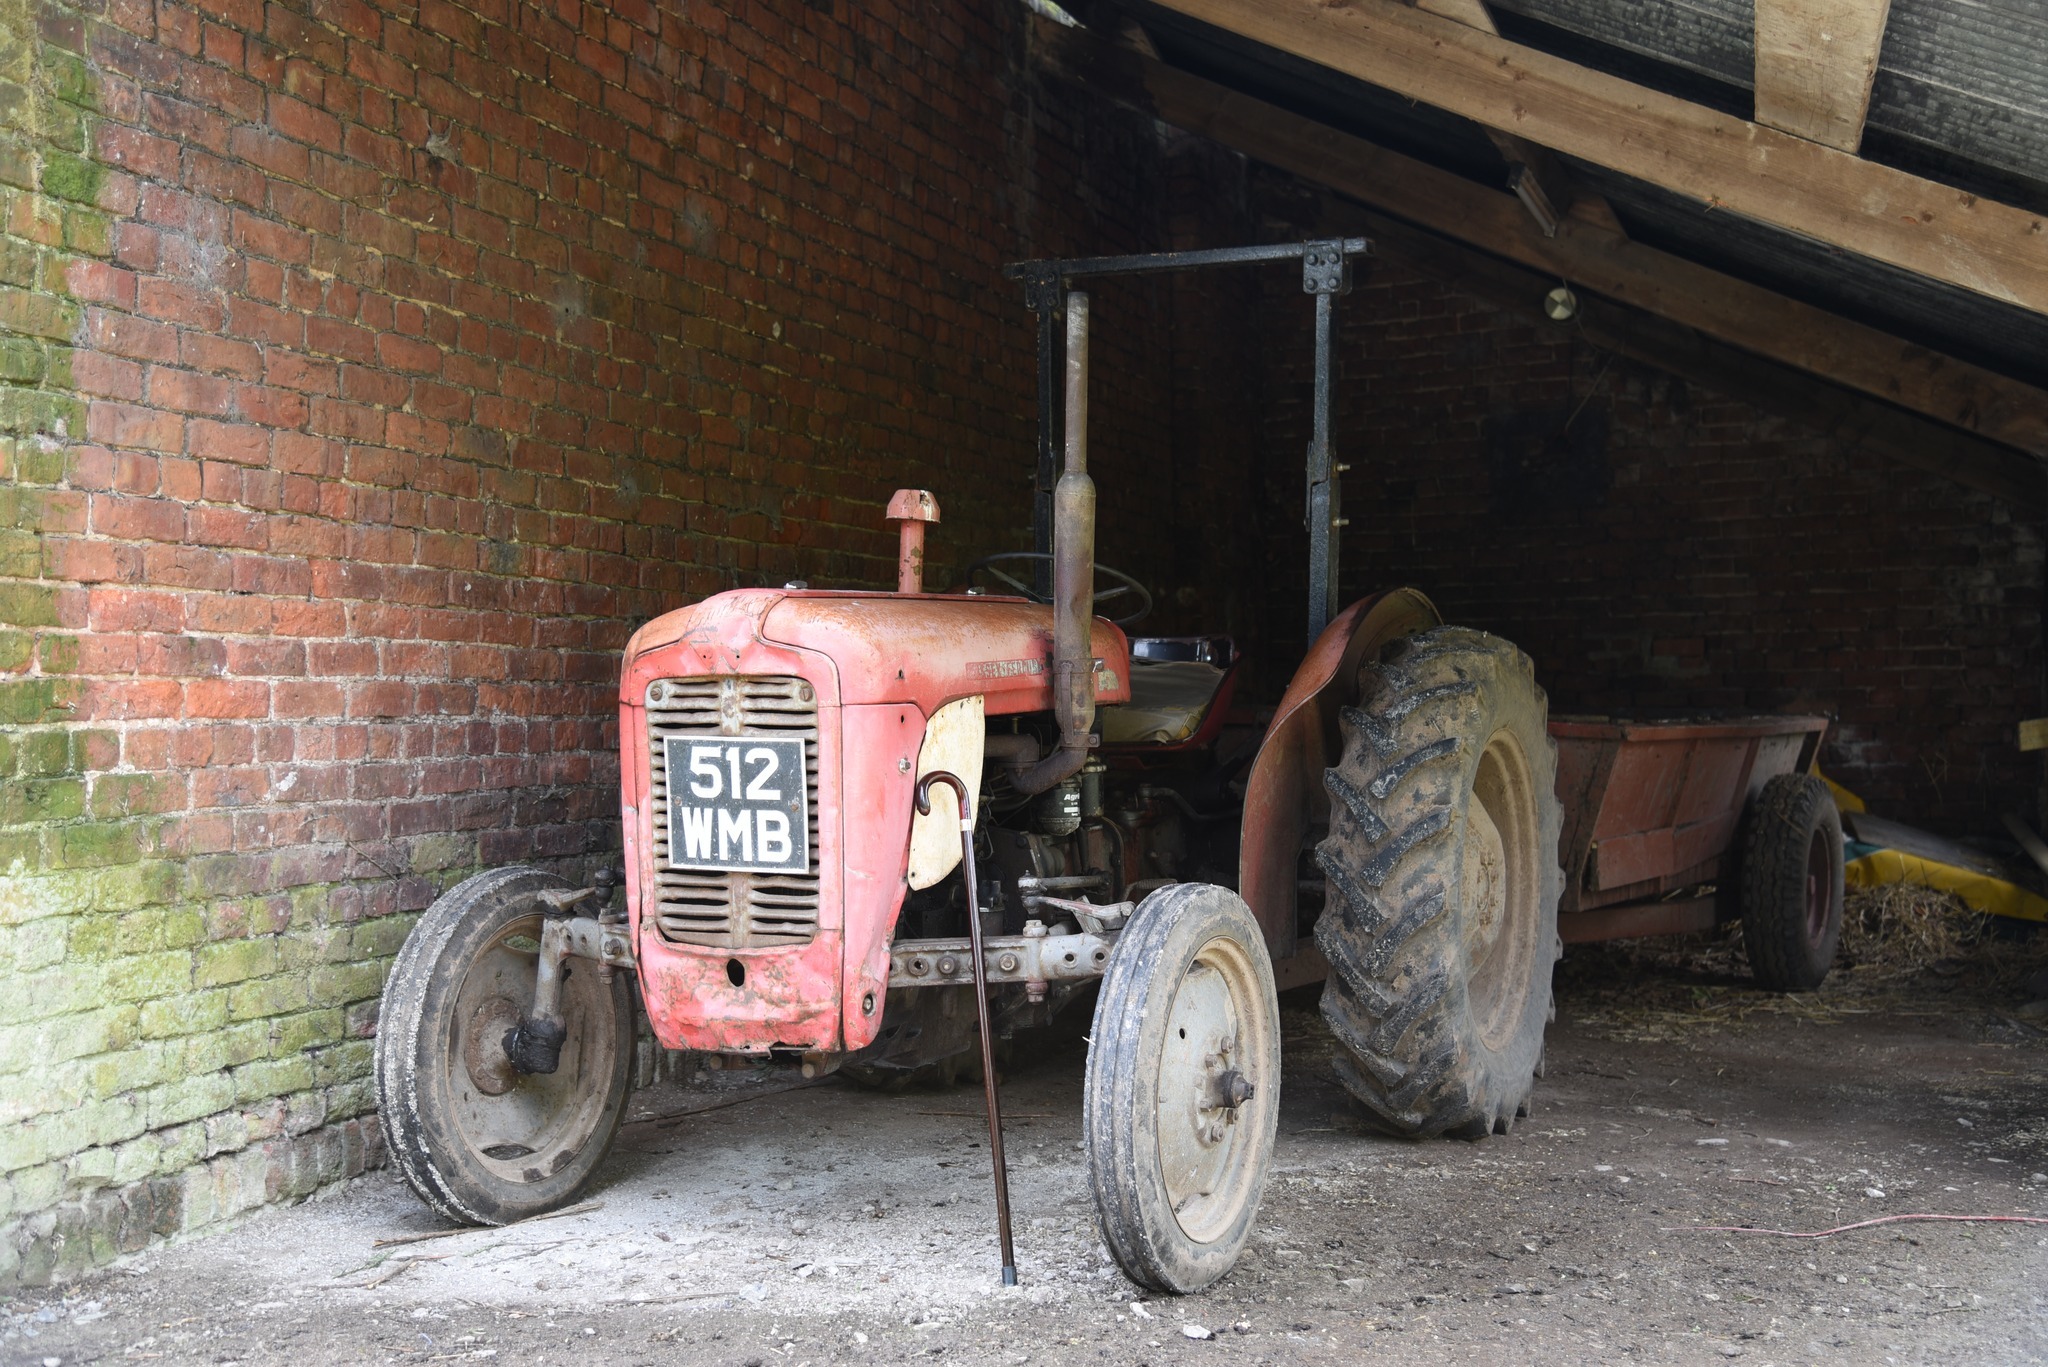 Massey Ferguson tractor at Peover Hall, Knutsford by Michael Kay